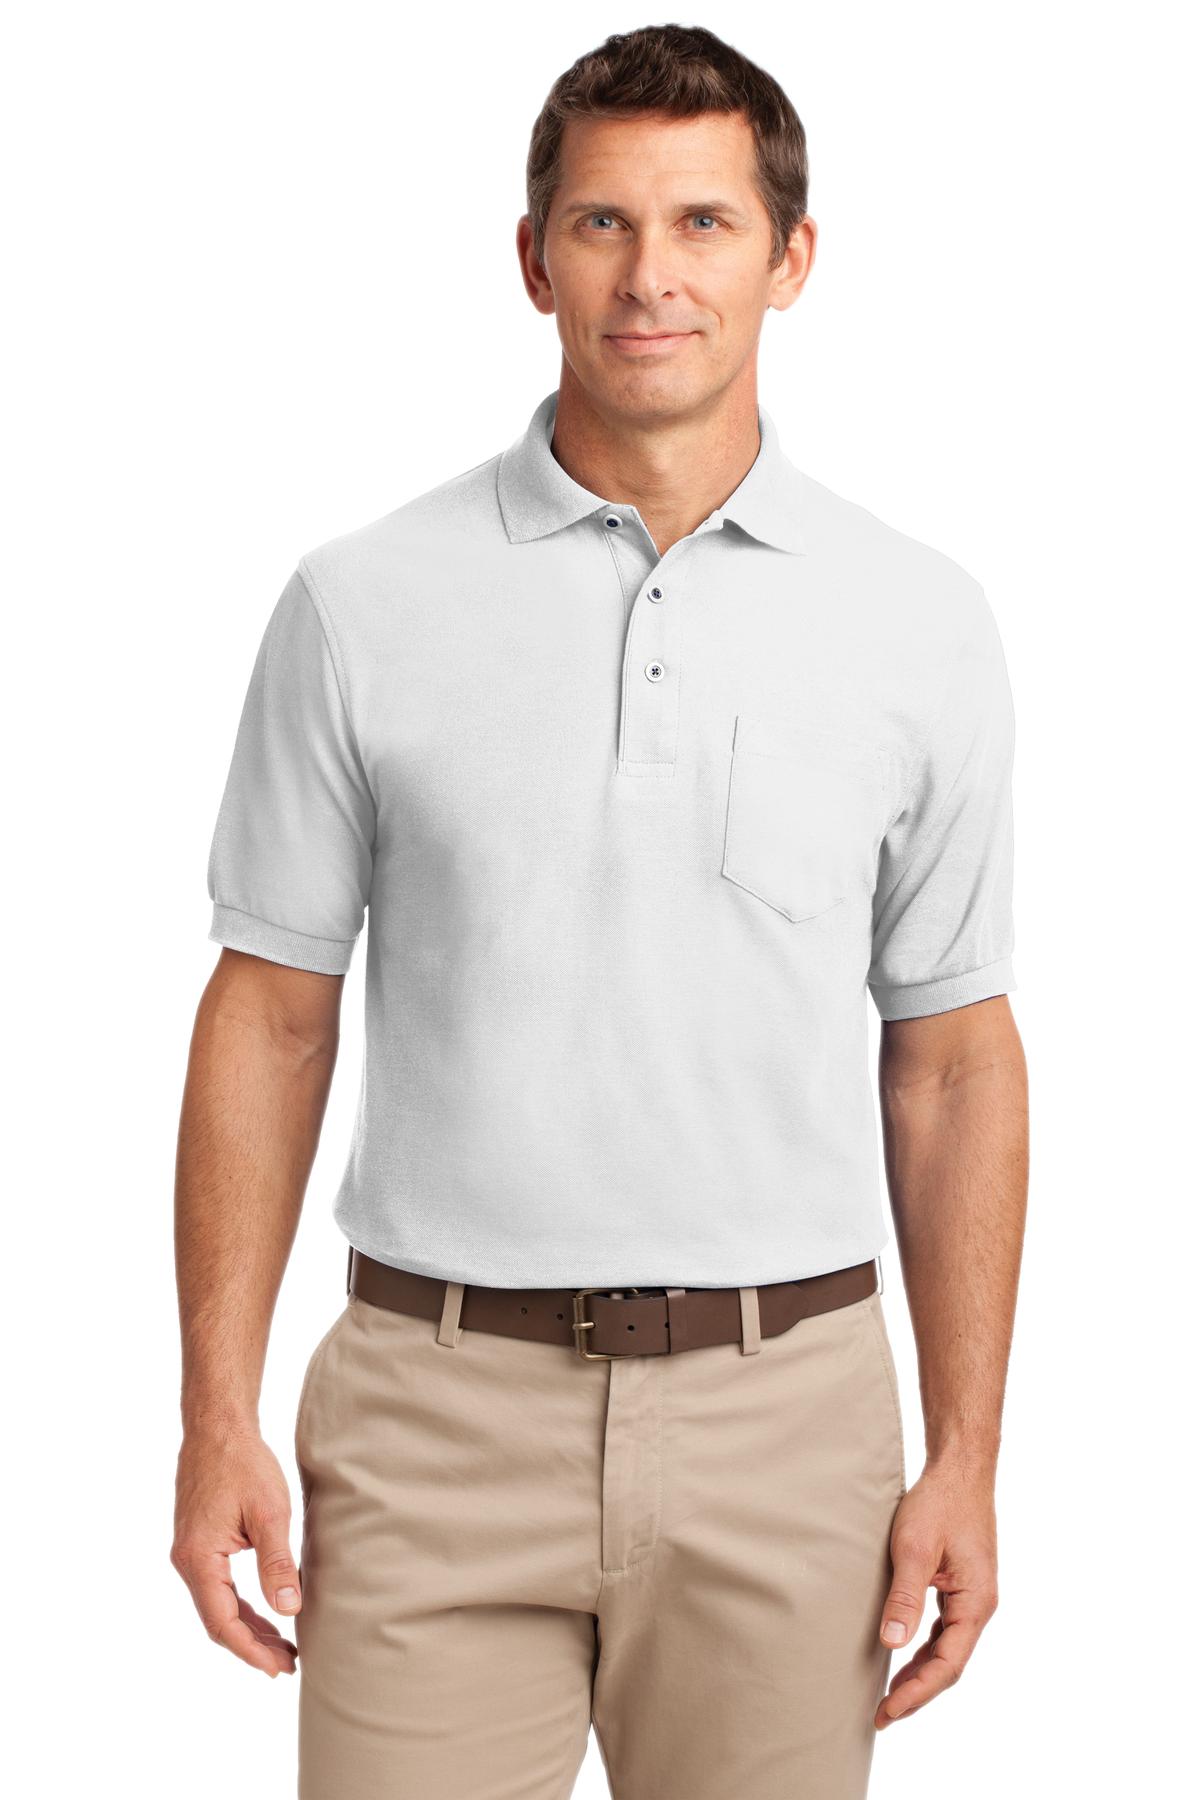 Silk Touch™ Polo with Pocket.  K500P